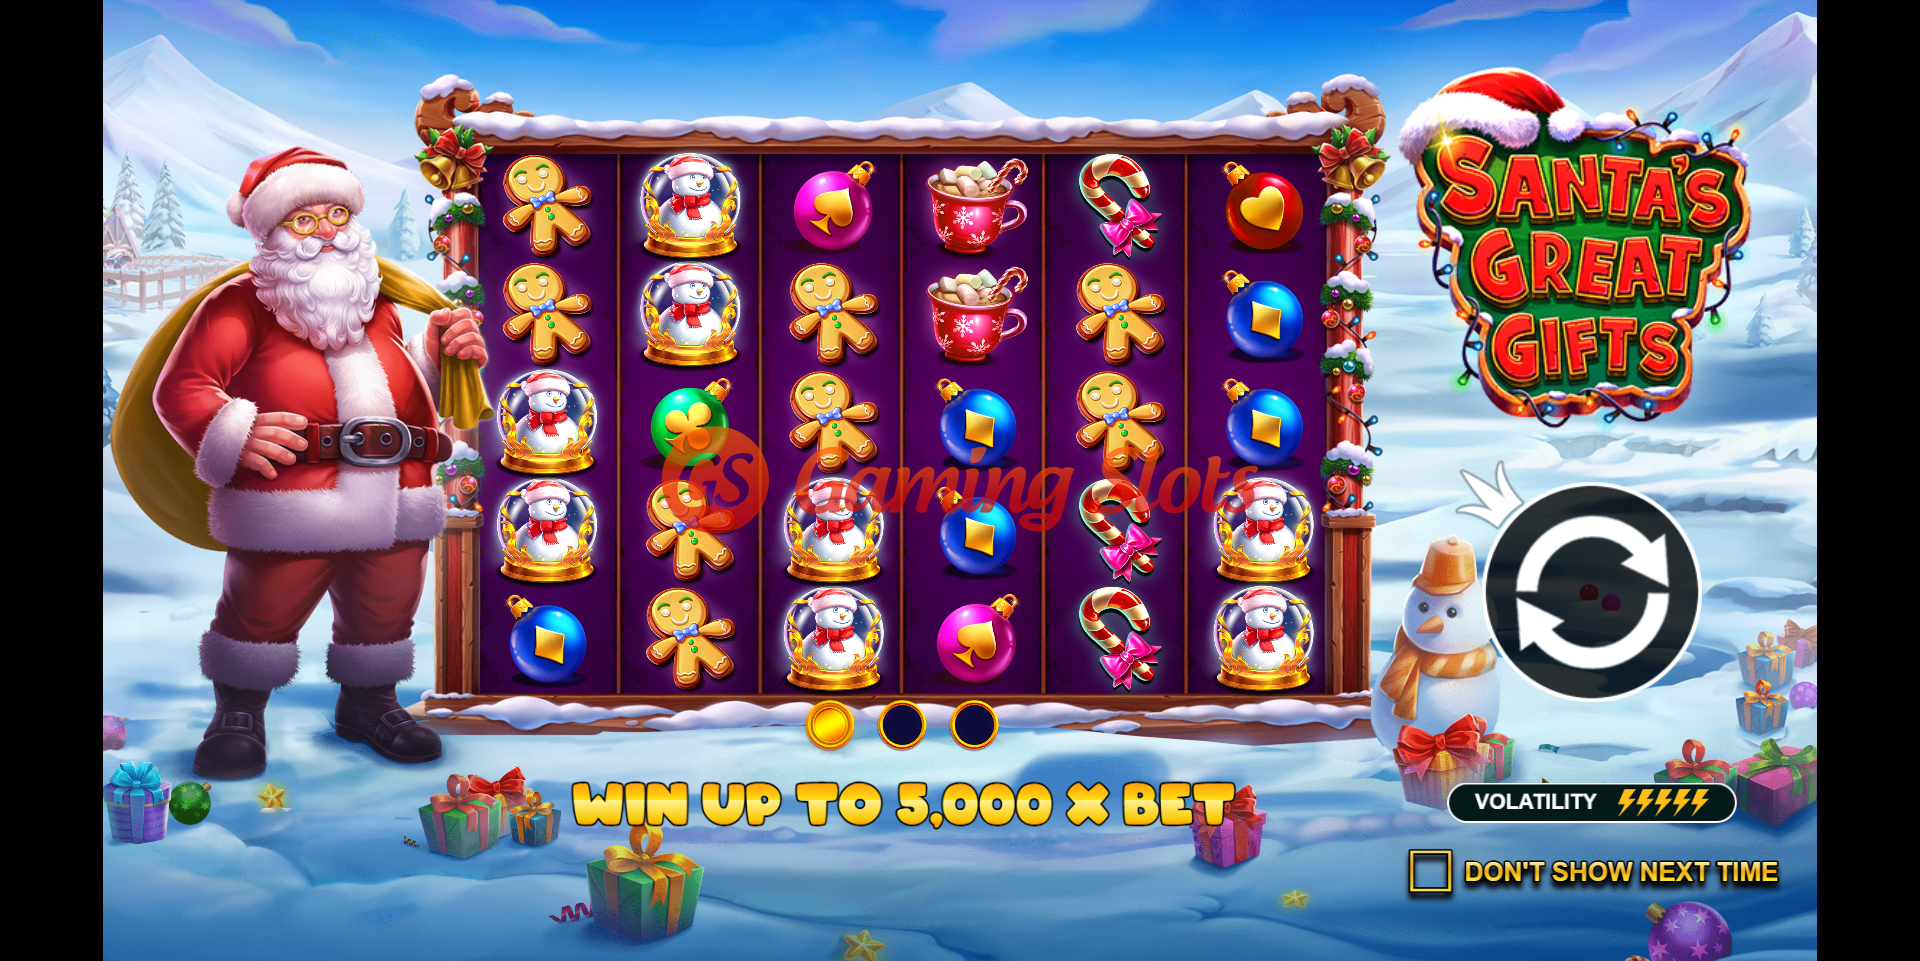 Game Intro for Santa's Great Gifts slot from Pragmatic Play